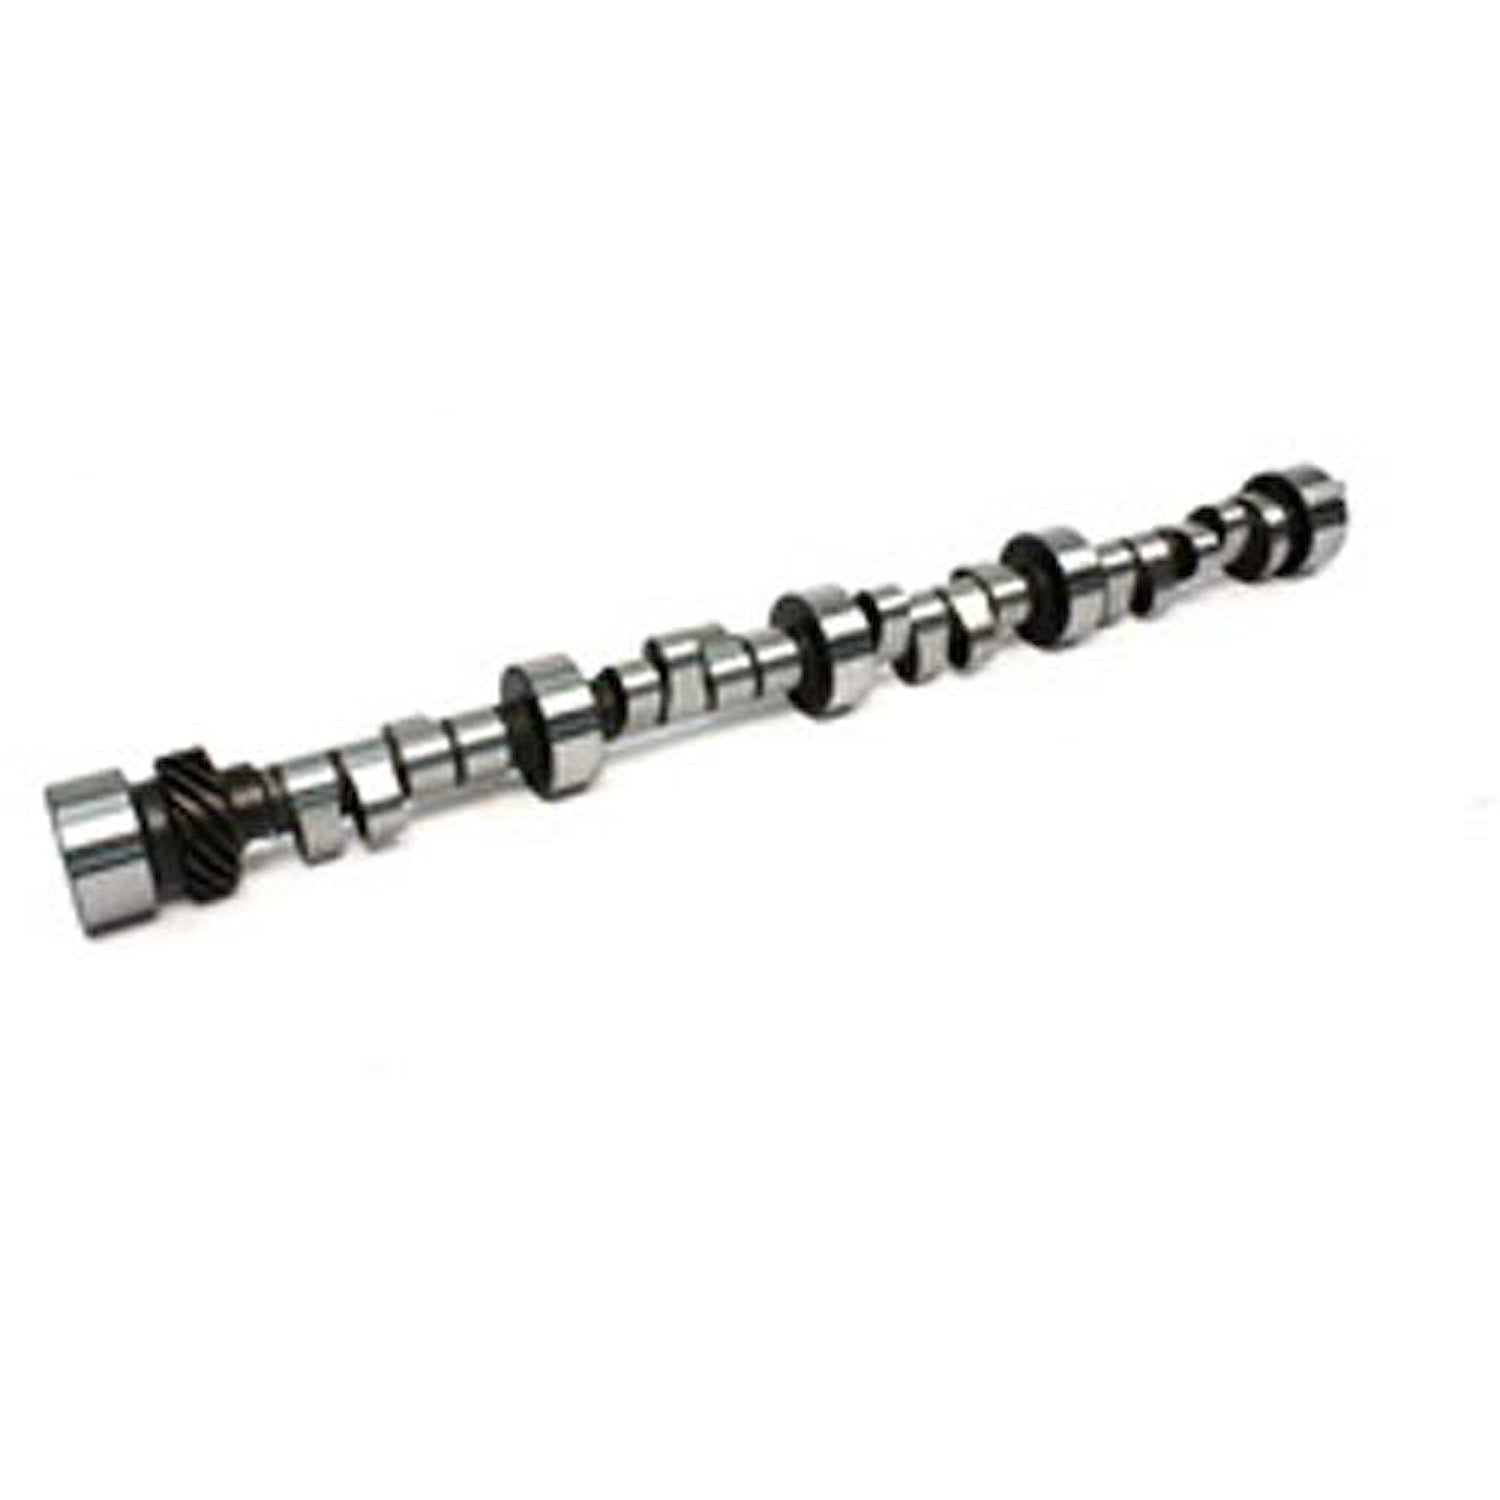 OWM Traction Control Camshaft Small Block Chevy 262-400ci